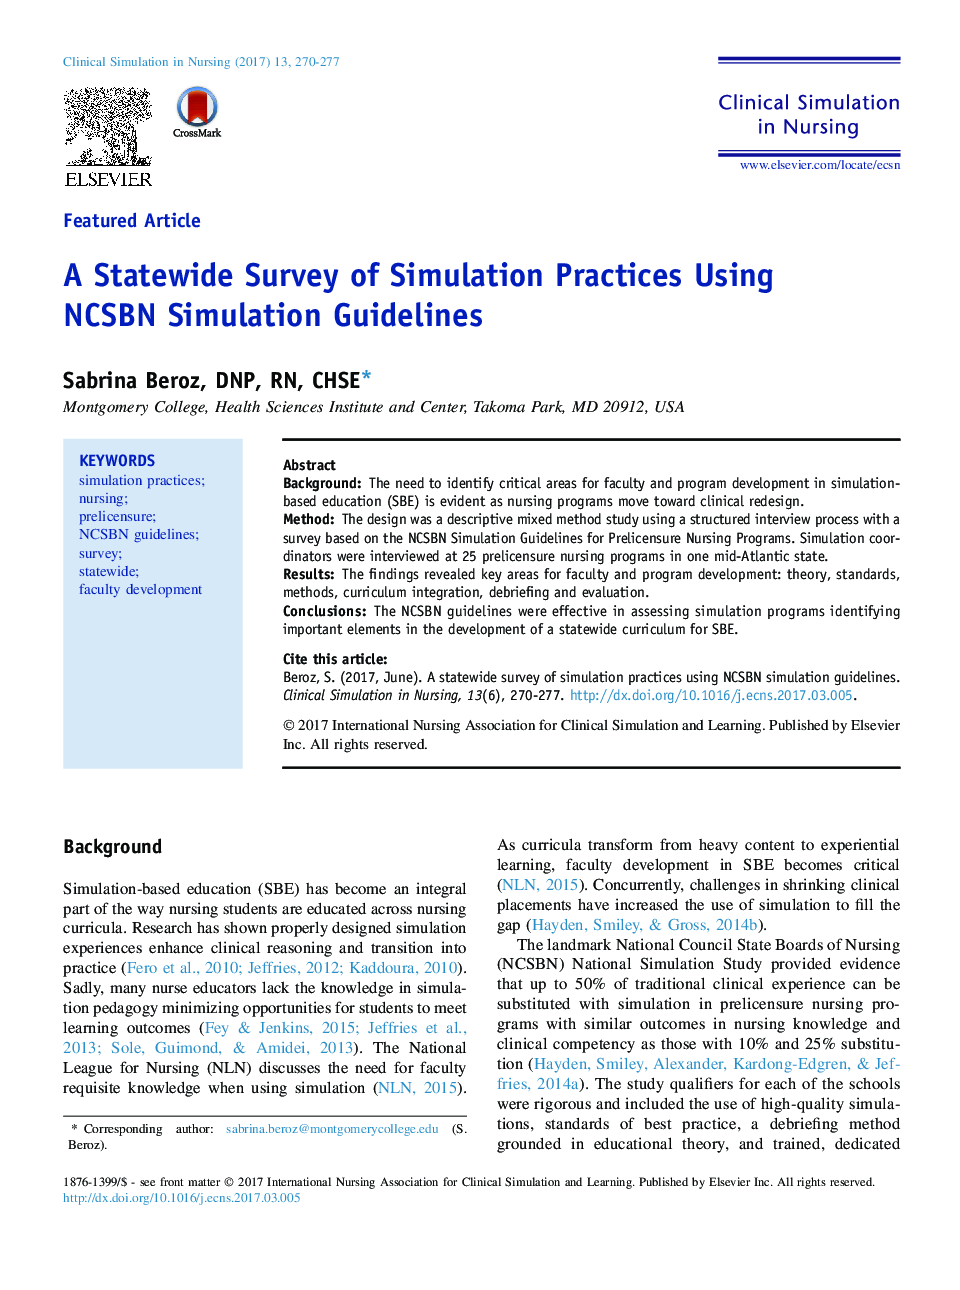 A Statewide Survey of Simulation Practices Using NCSBN Simulation Guidelines